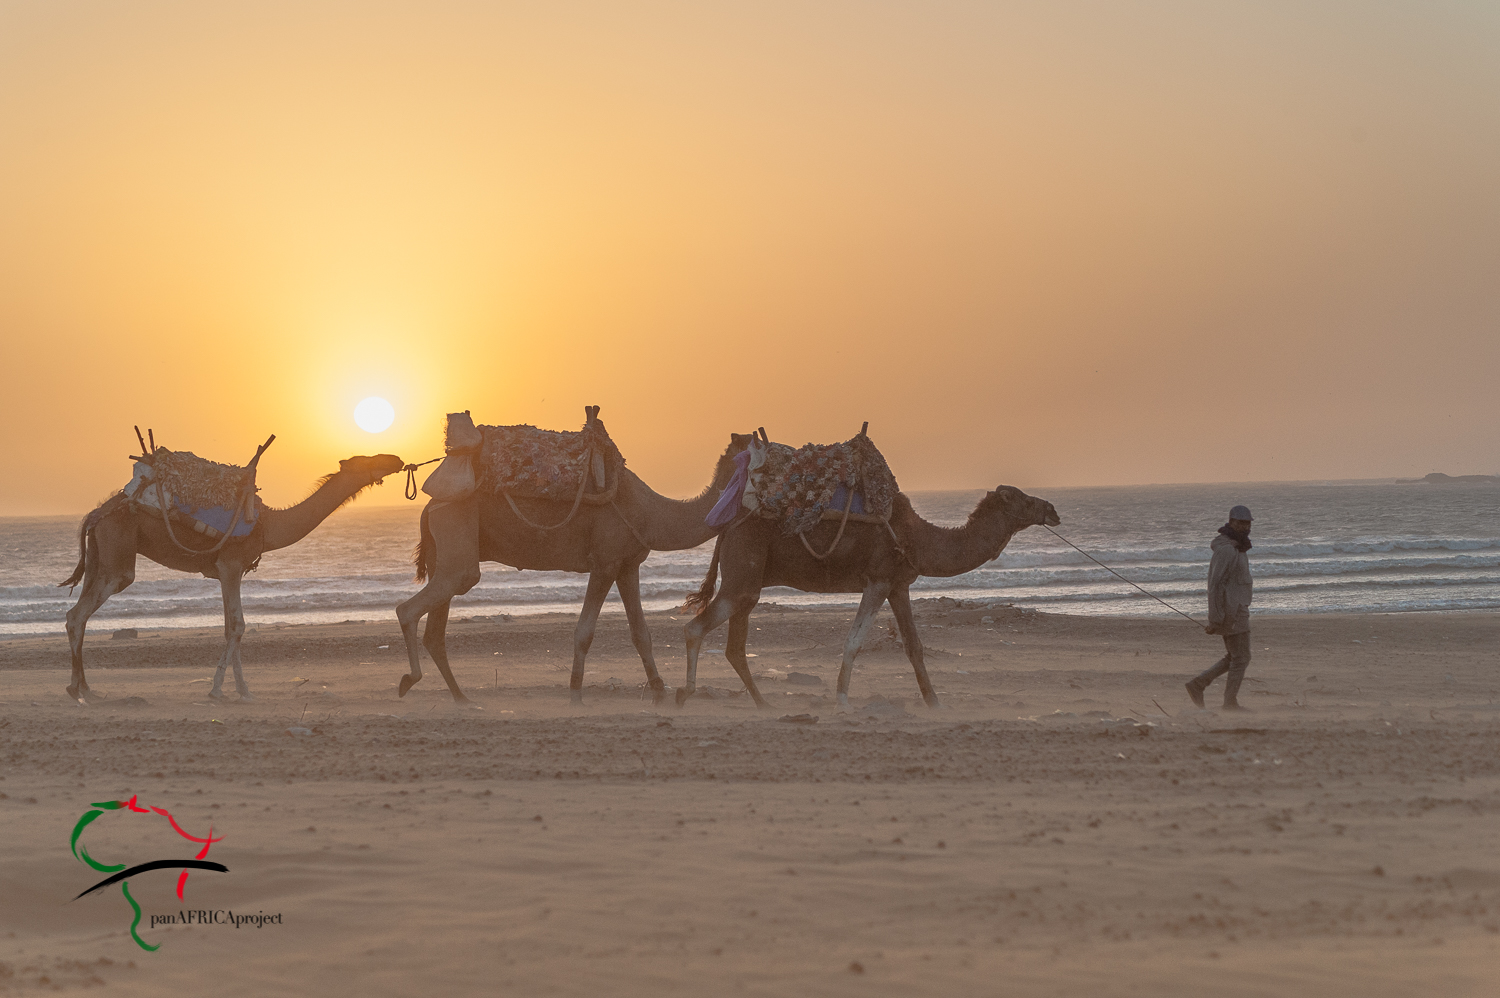 Man walking camels on the beach